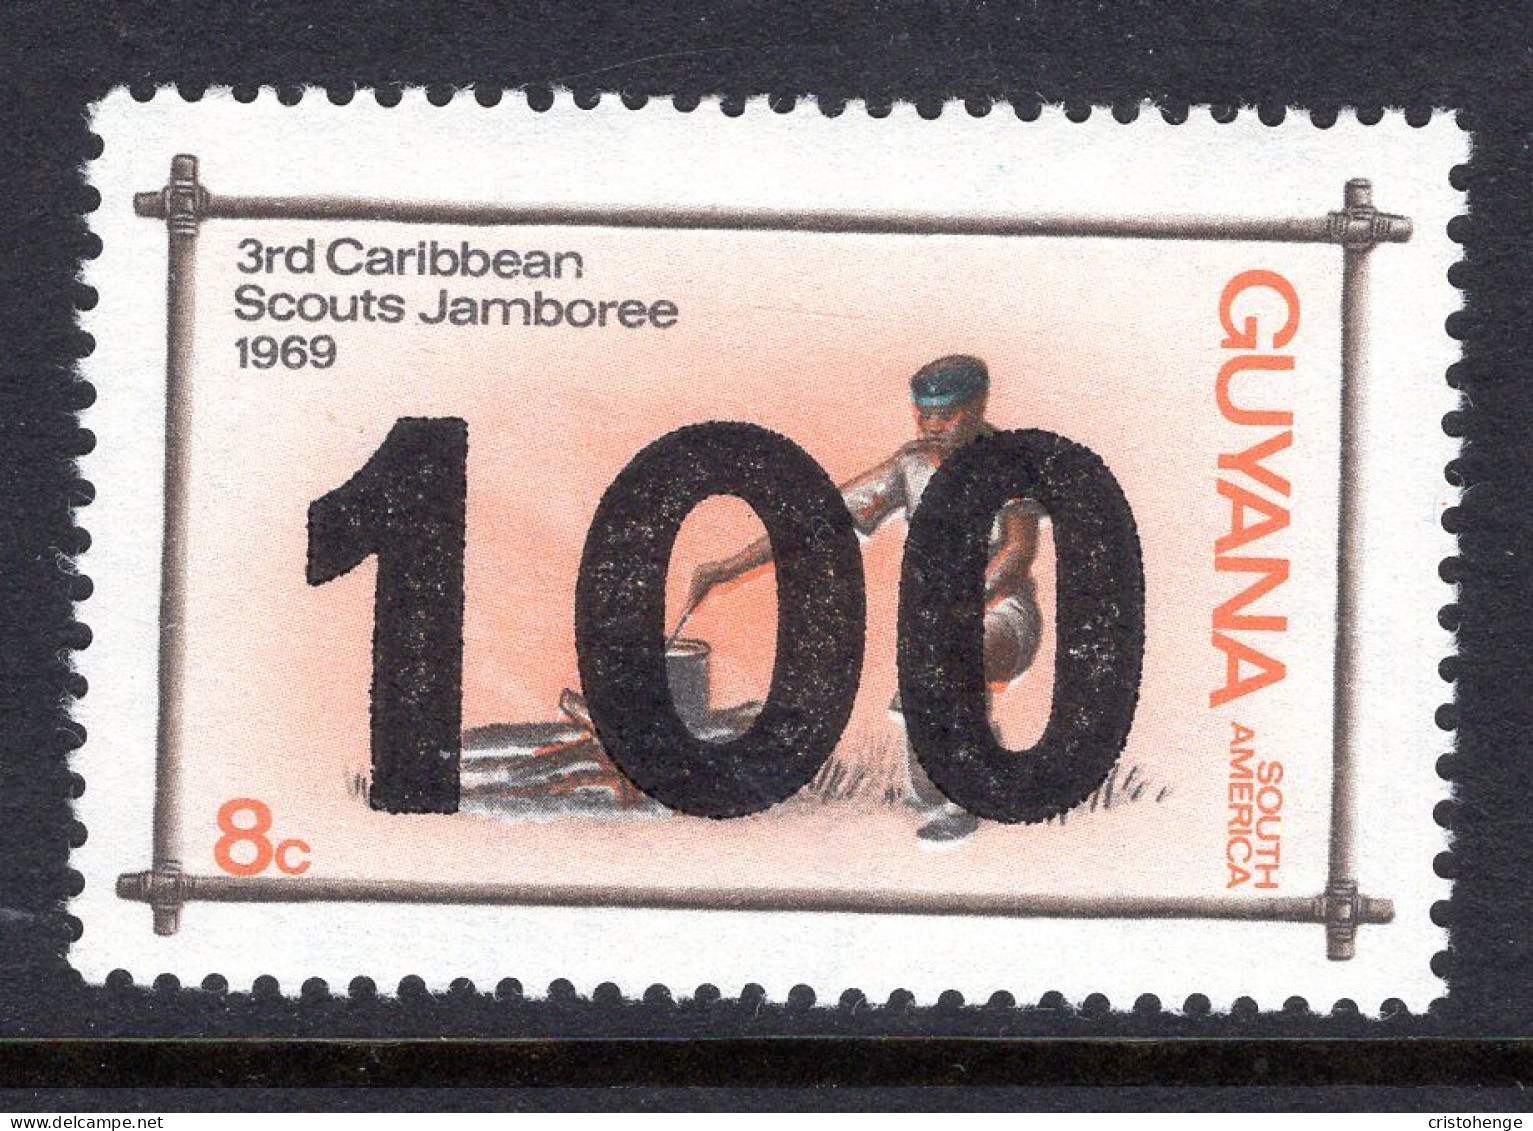 Guyana 1981 Surcharges - 100c On 8c Scout Jamboree HM (SG 828) - Guyana (1966-...)